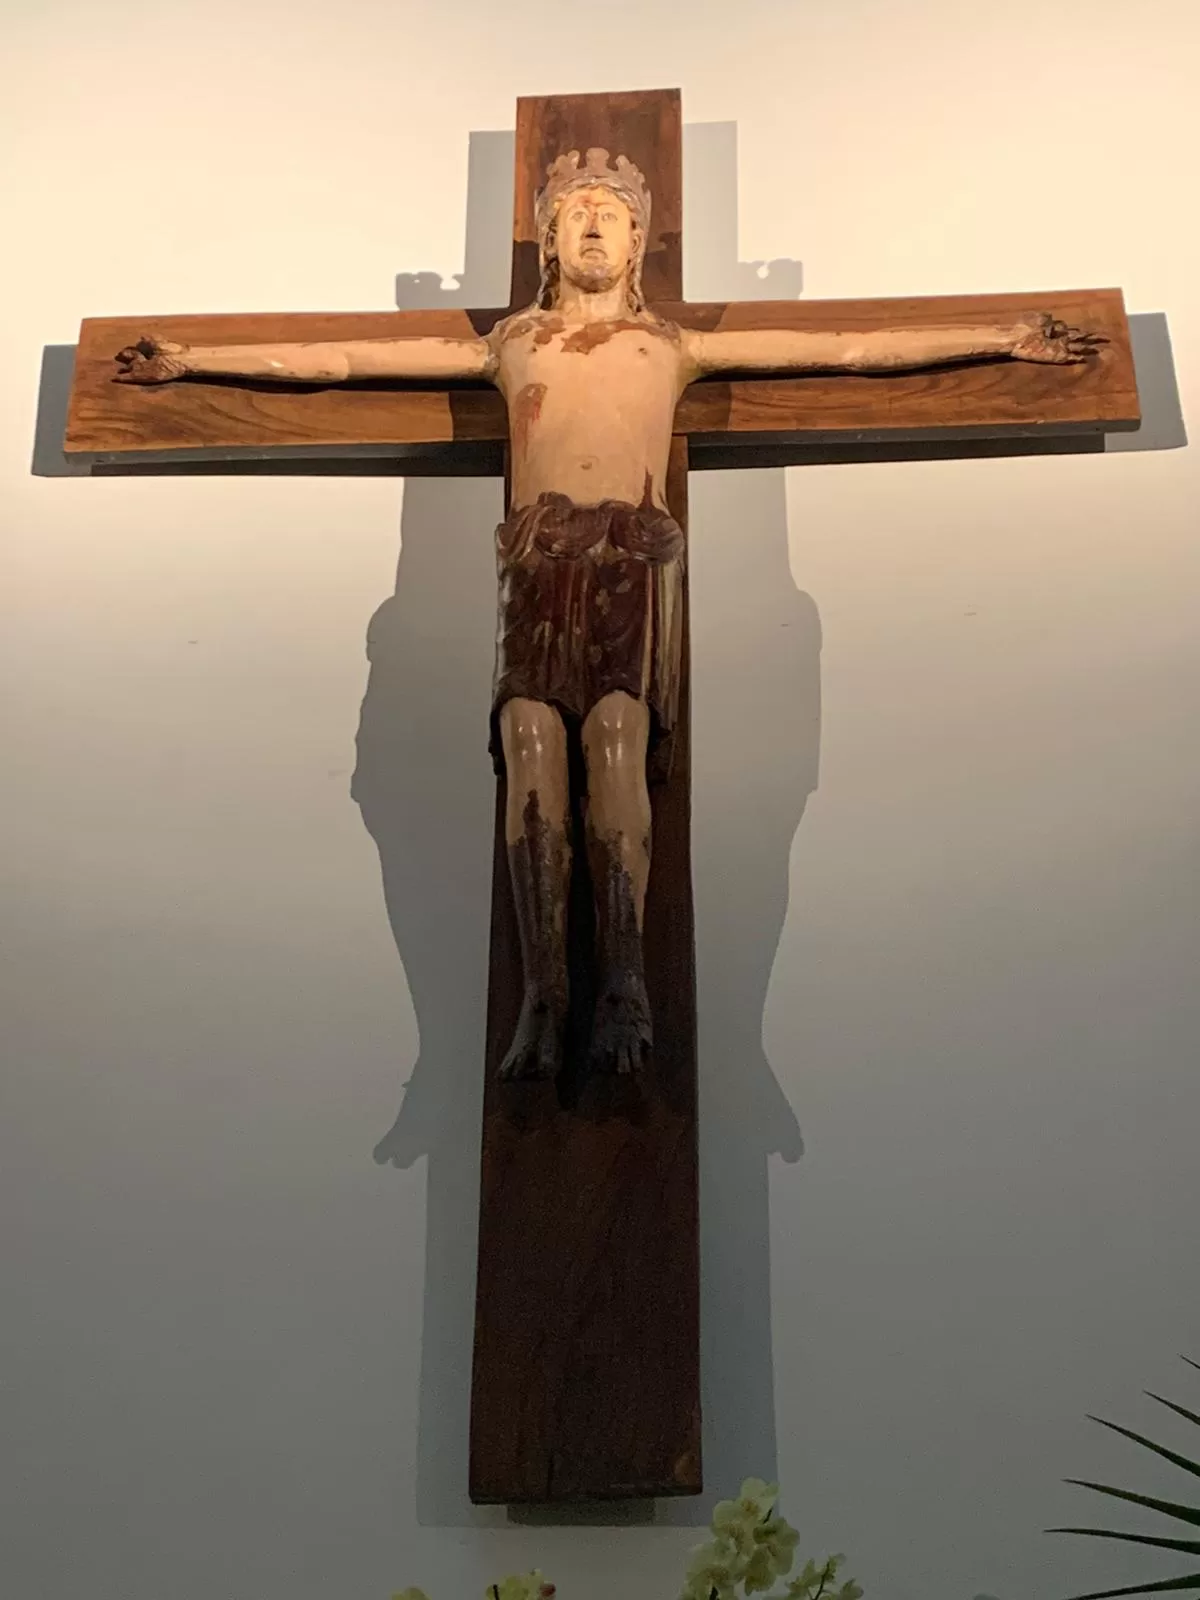 A wooden cross with a person on it Description automatically generated